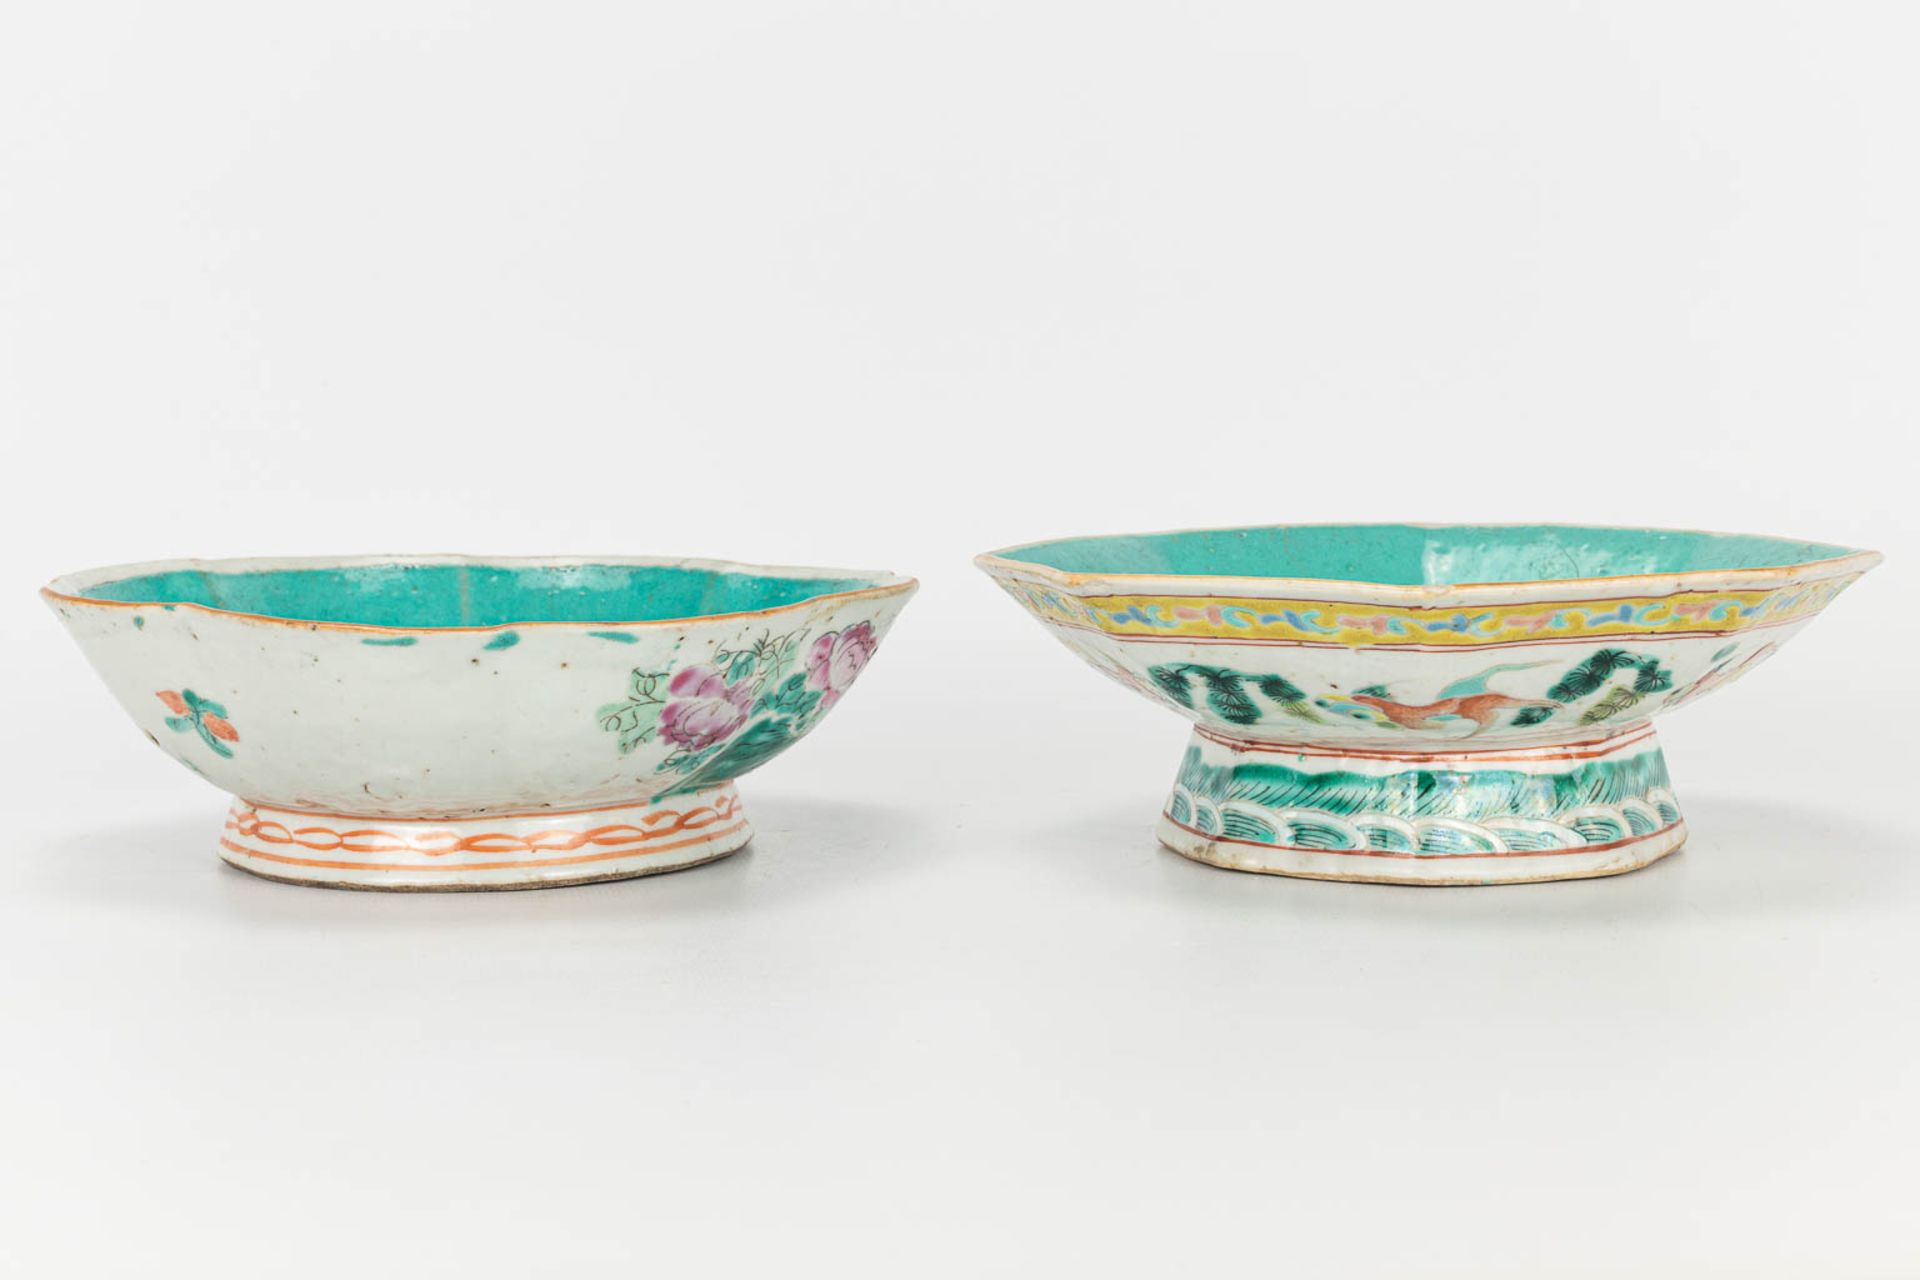 A set of 4 items made of Chinese porcelain. 2 small bowls and 2 ginger jars without lids. - Image 7 of 23